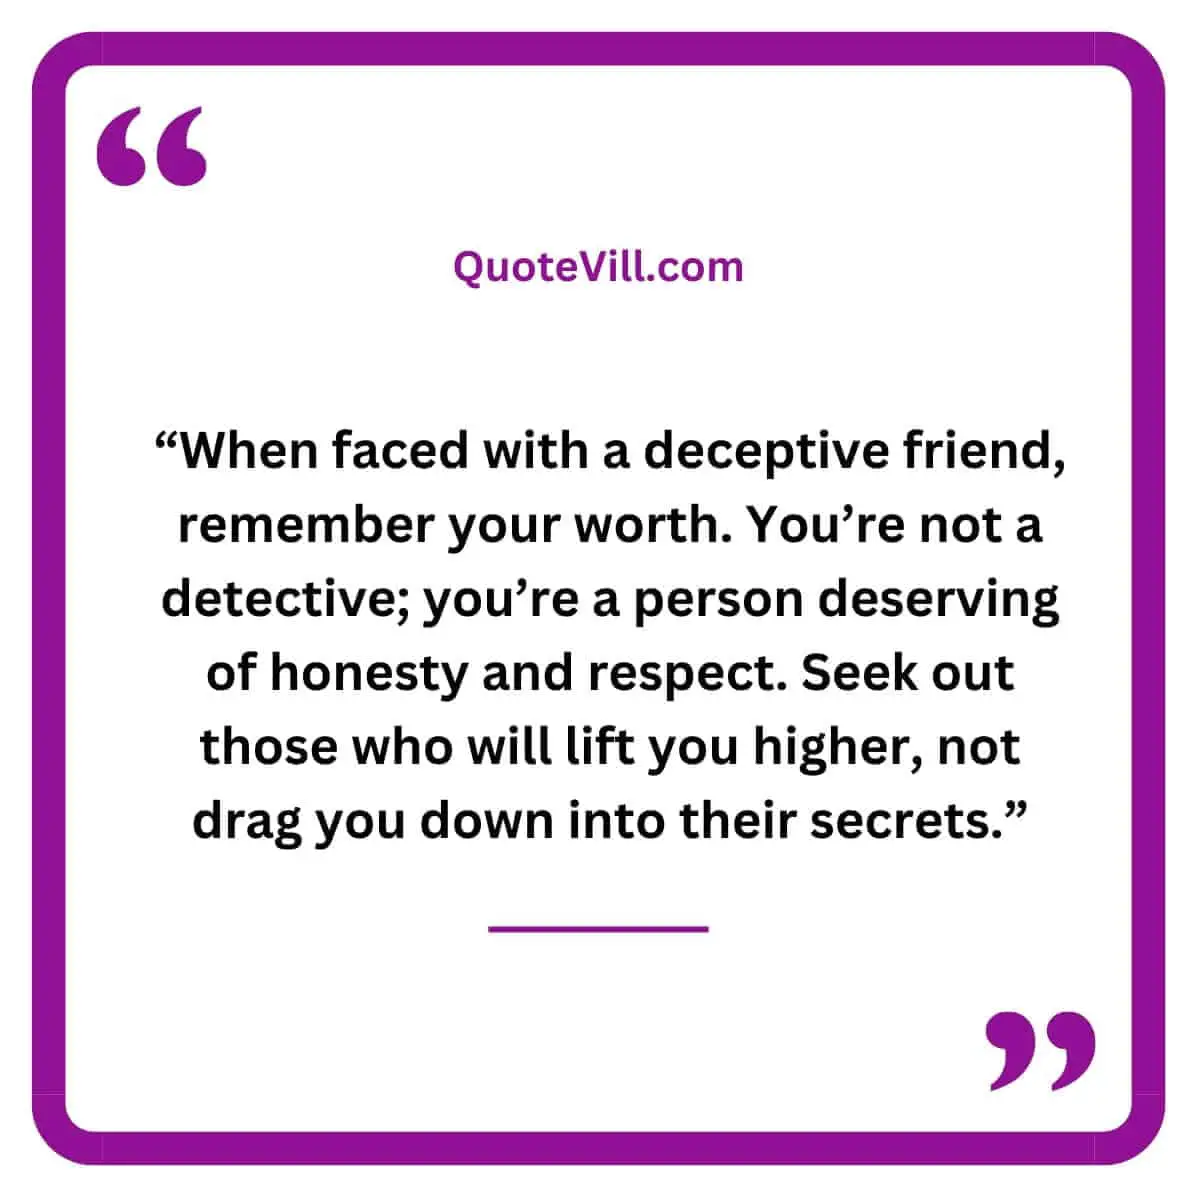 Motivational Quotes On Dealing with Shady Individuals